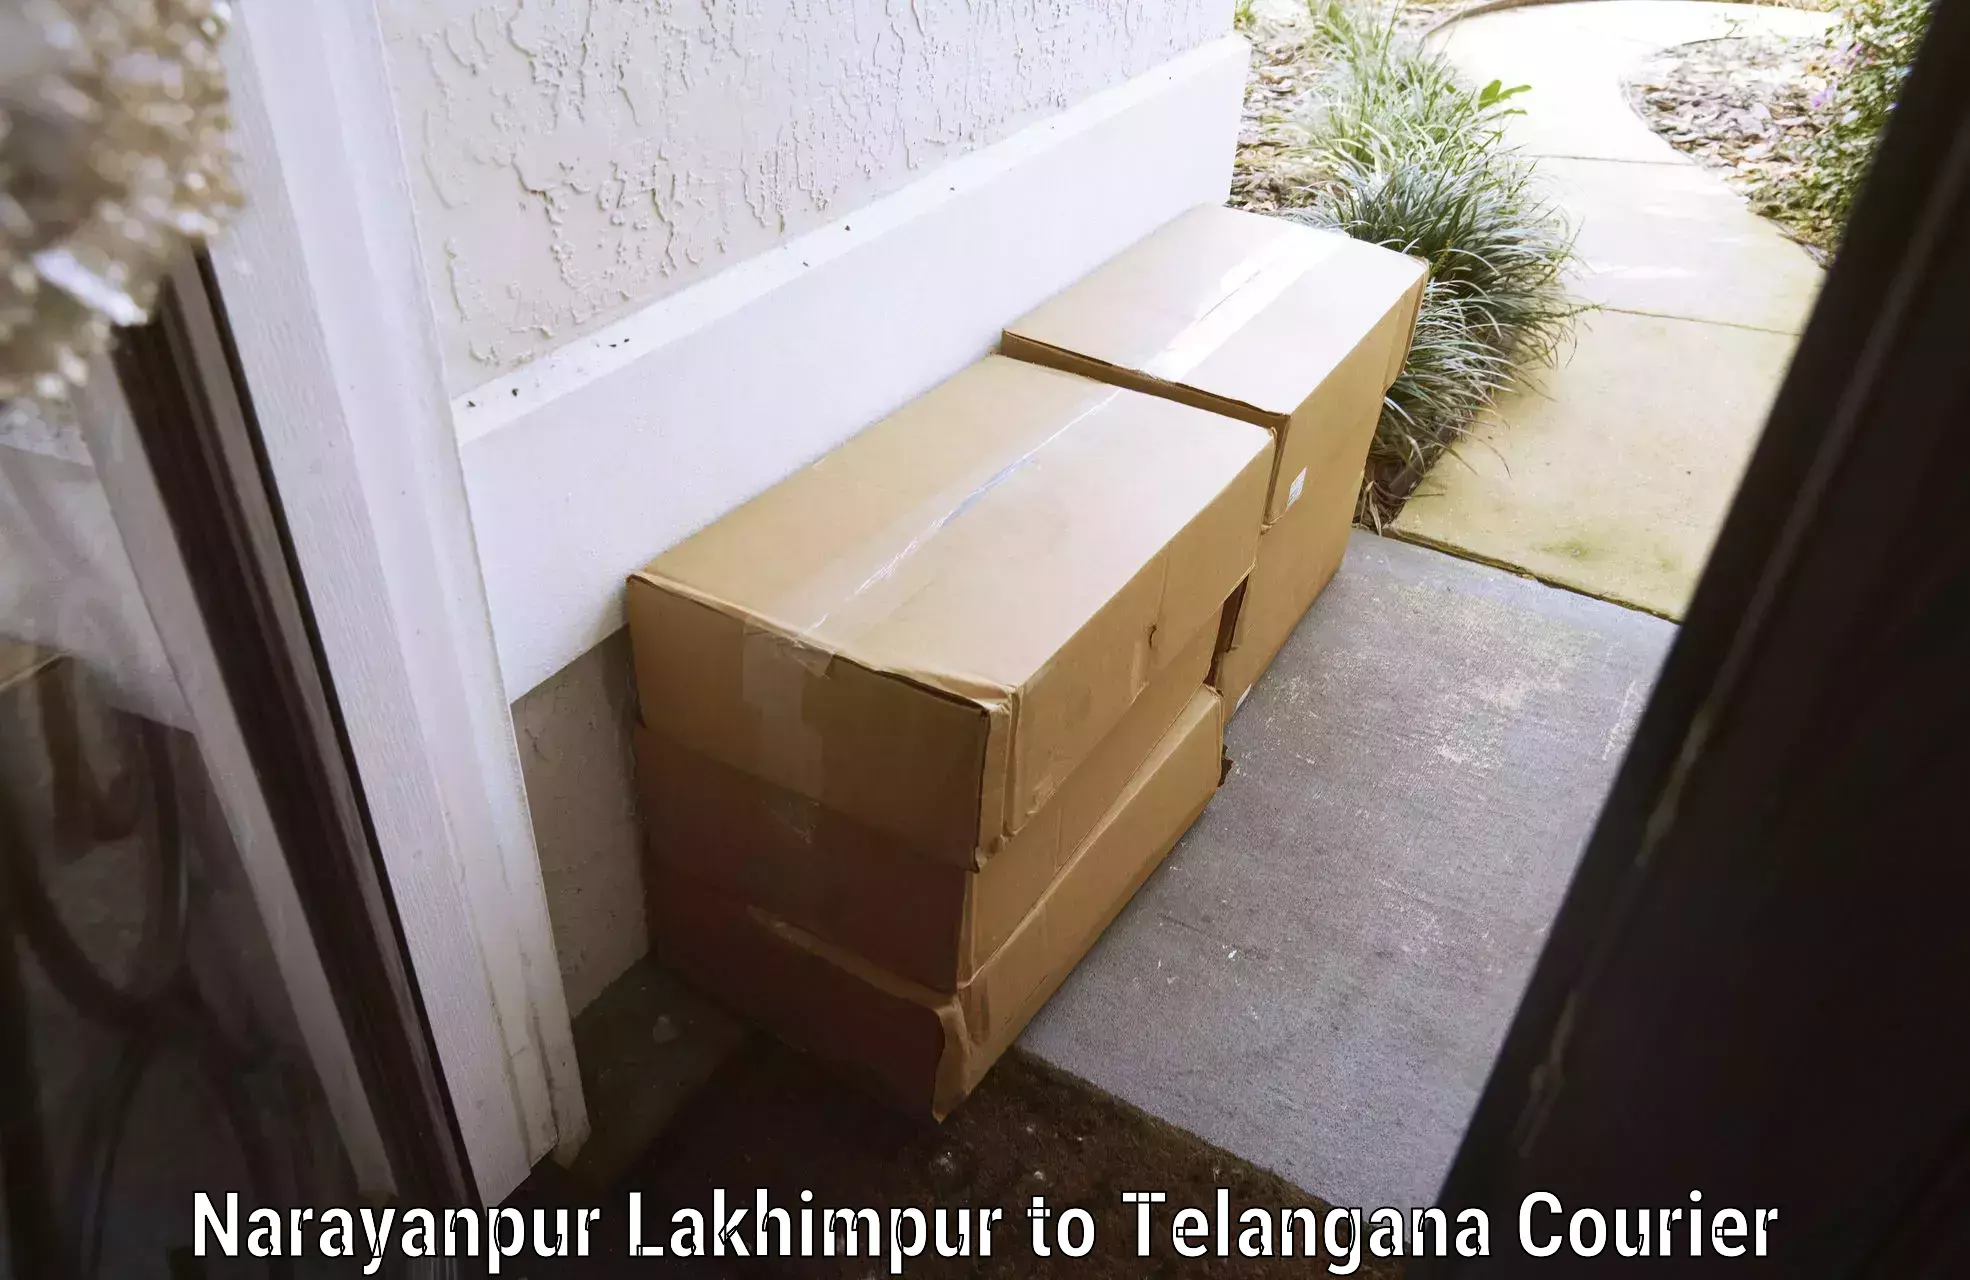 Luggage delivery providers Narayanpur Lakhimpur to Bodhan